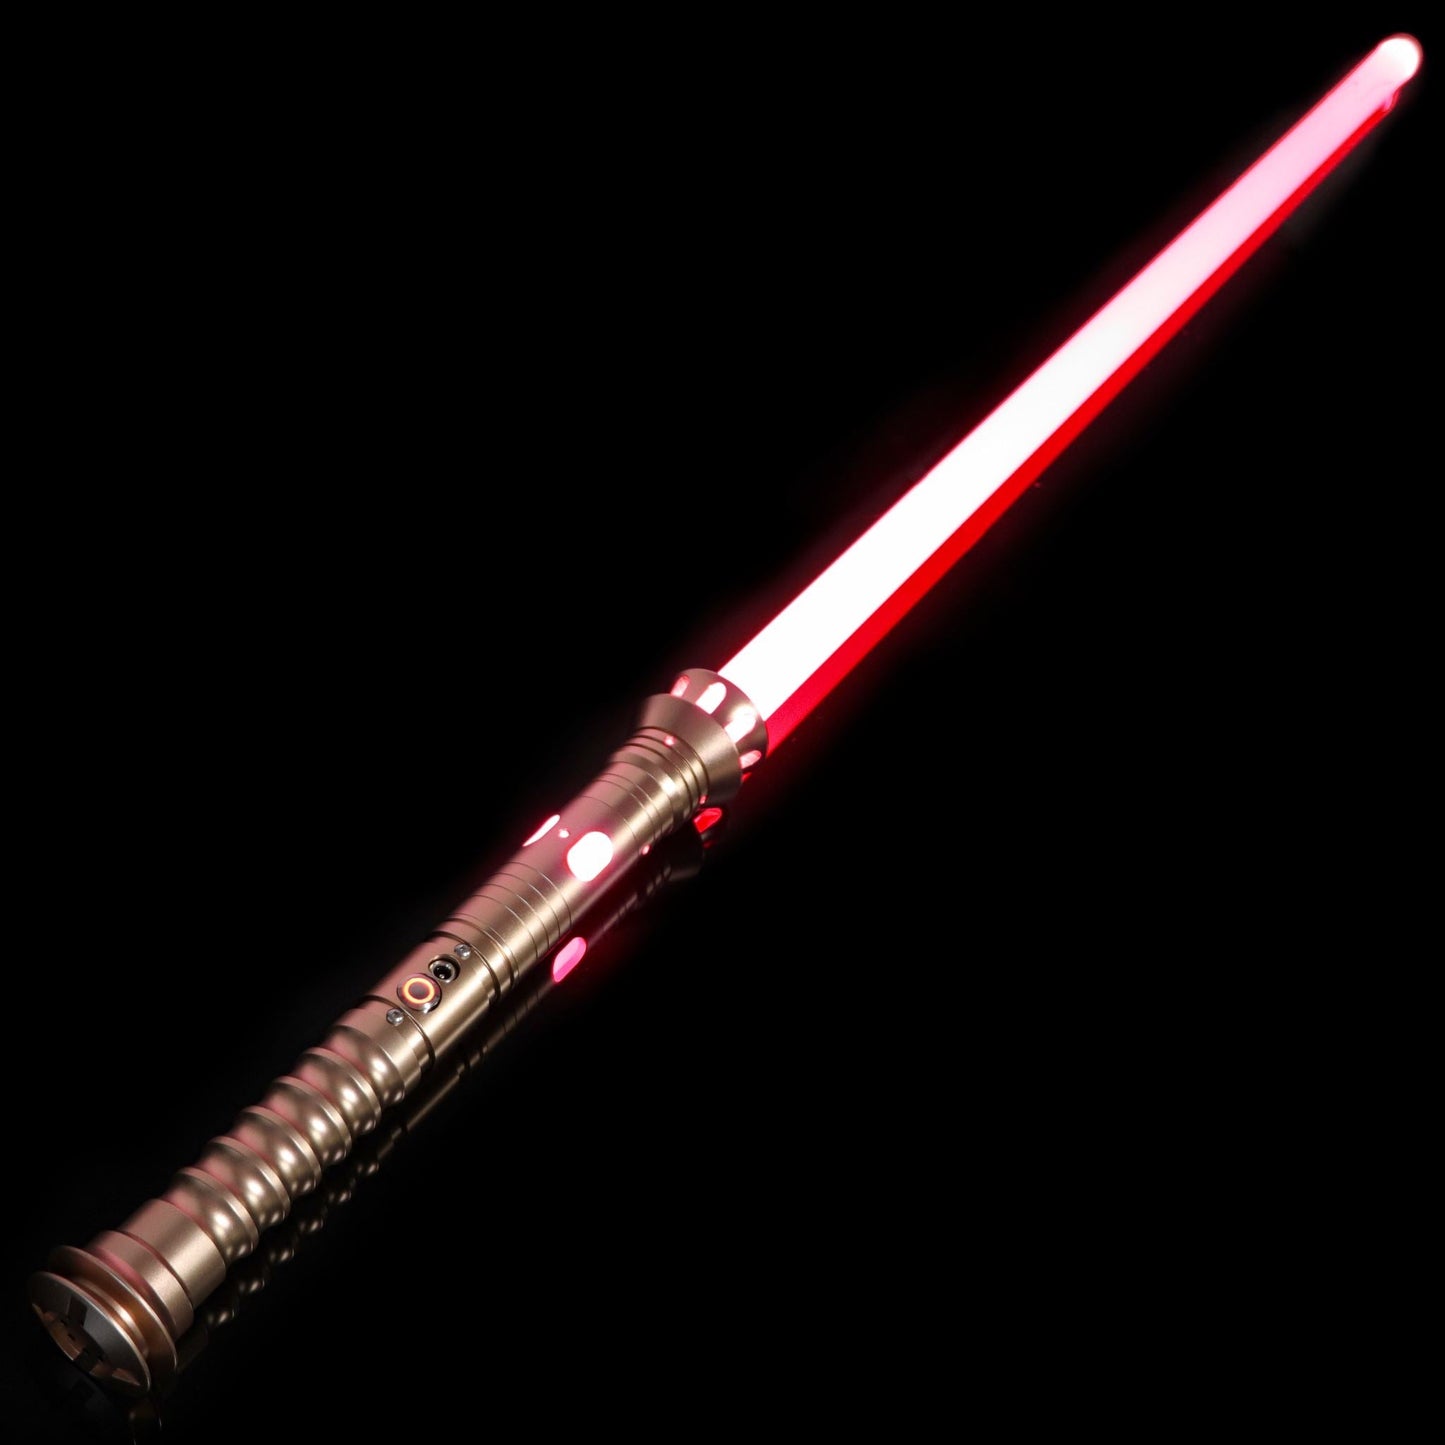 Caseo Lightsaber isabers